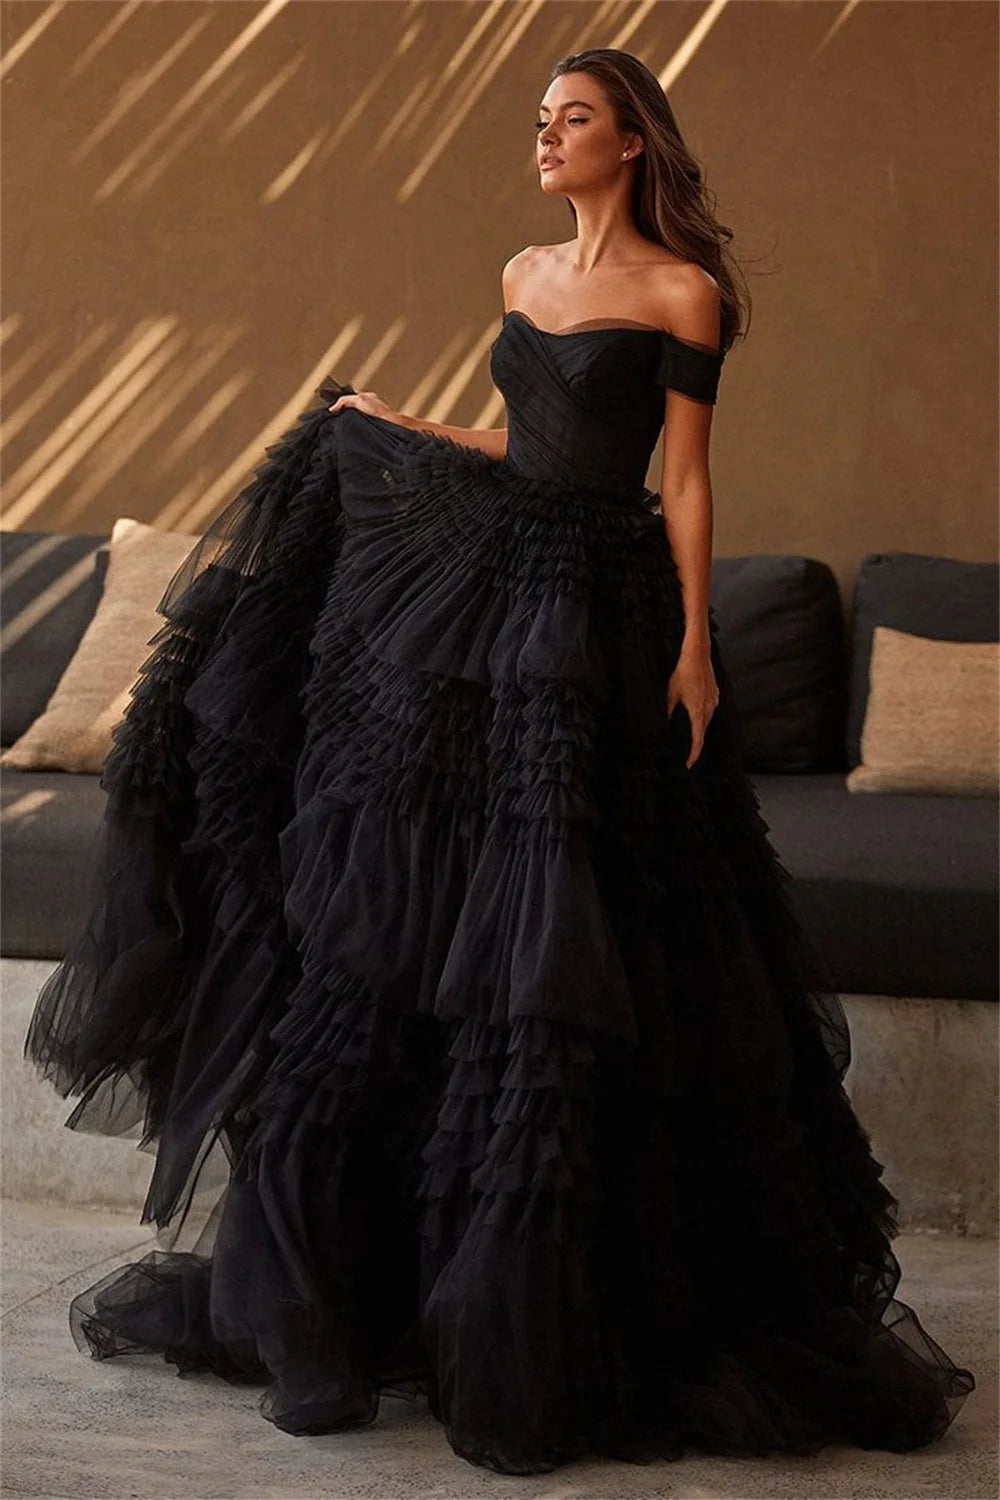 UU-Sexy Off Shoulder Prom Dress Black Multilayer فستان حفلات الزفاف Luxury Ball Gown Tulle Puffy Robes